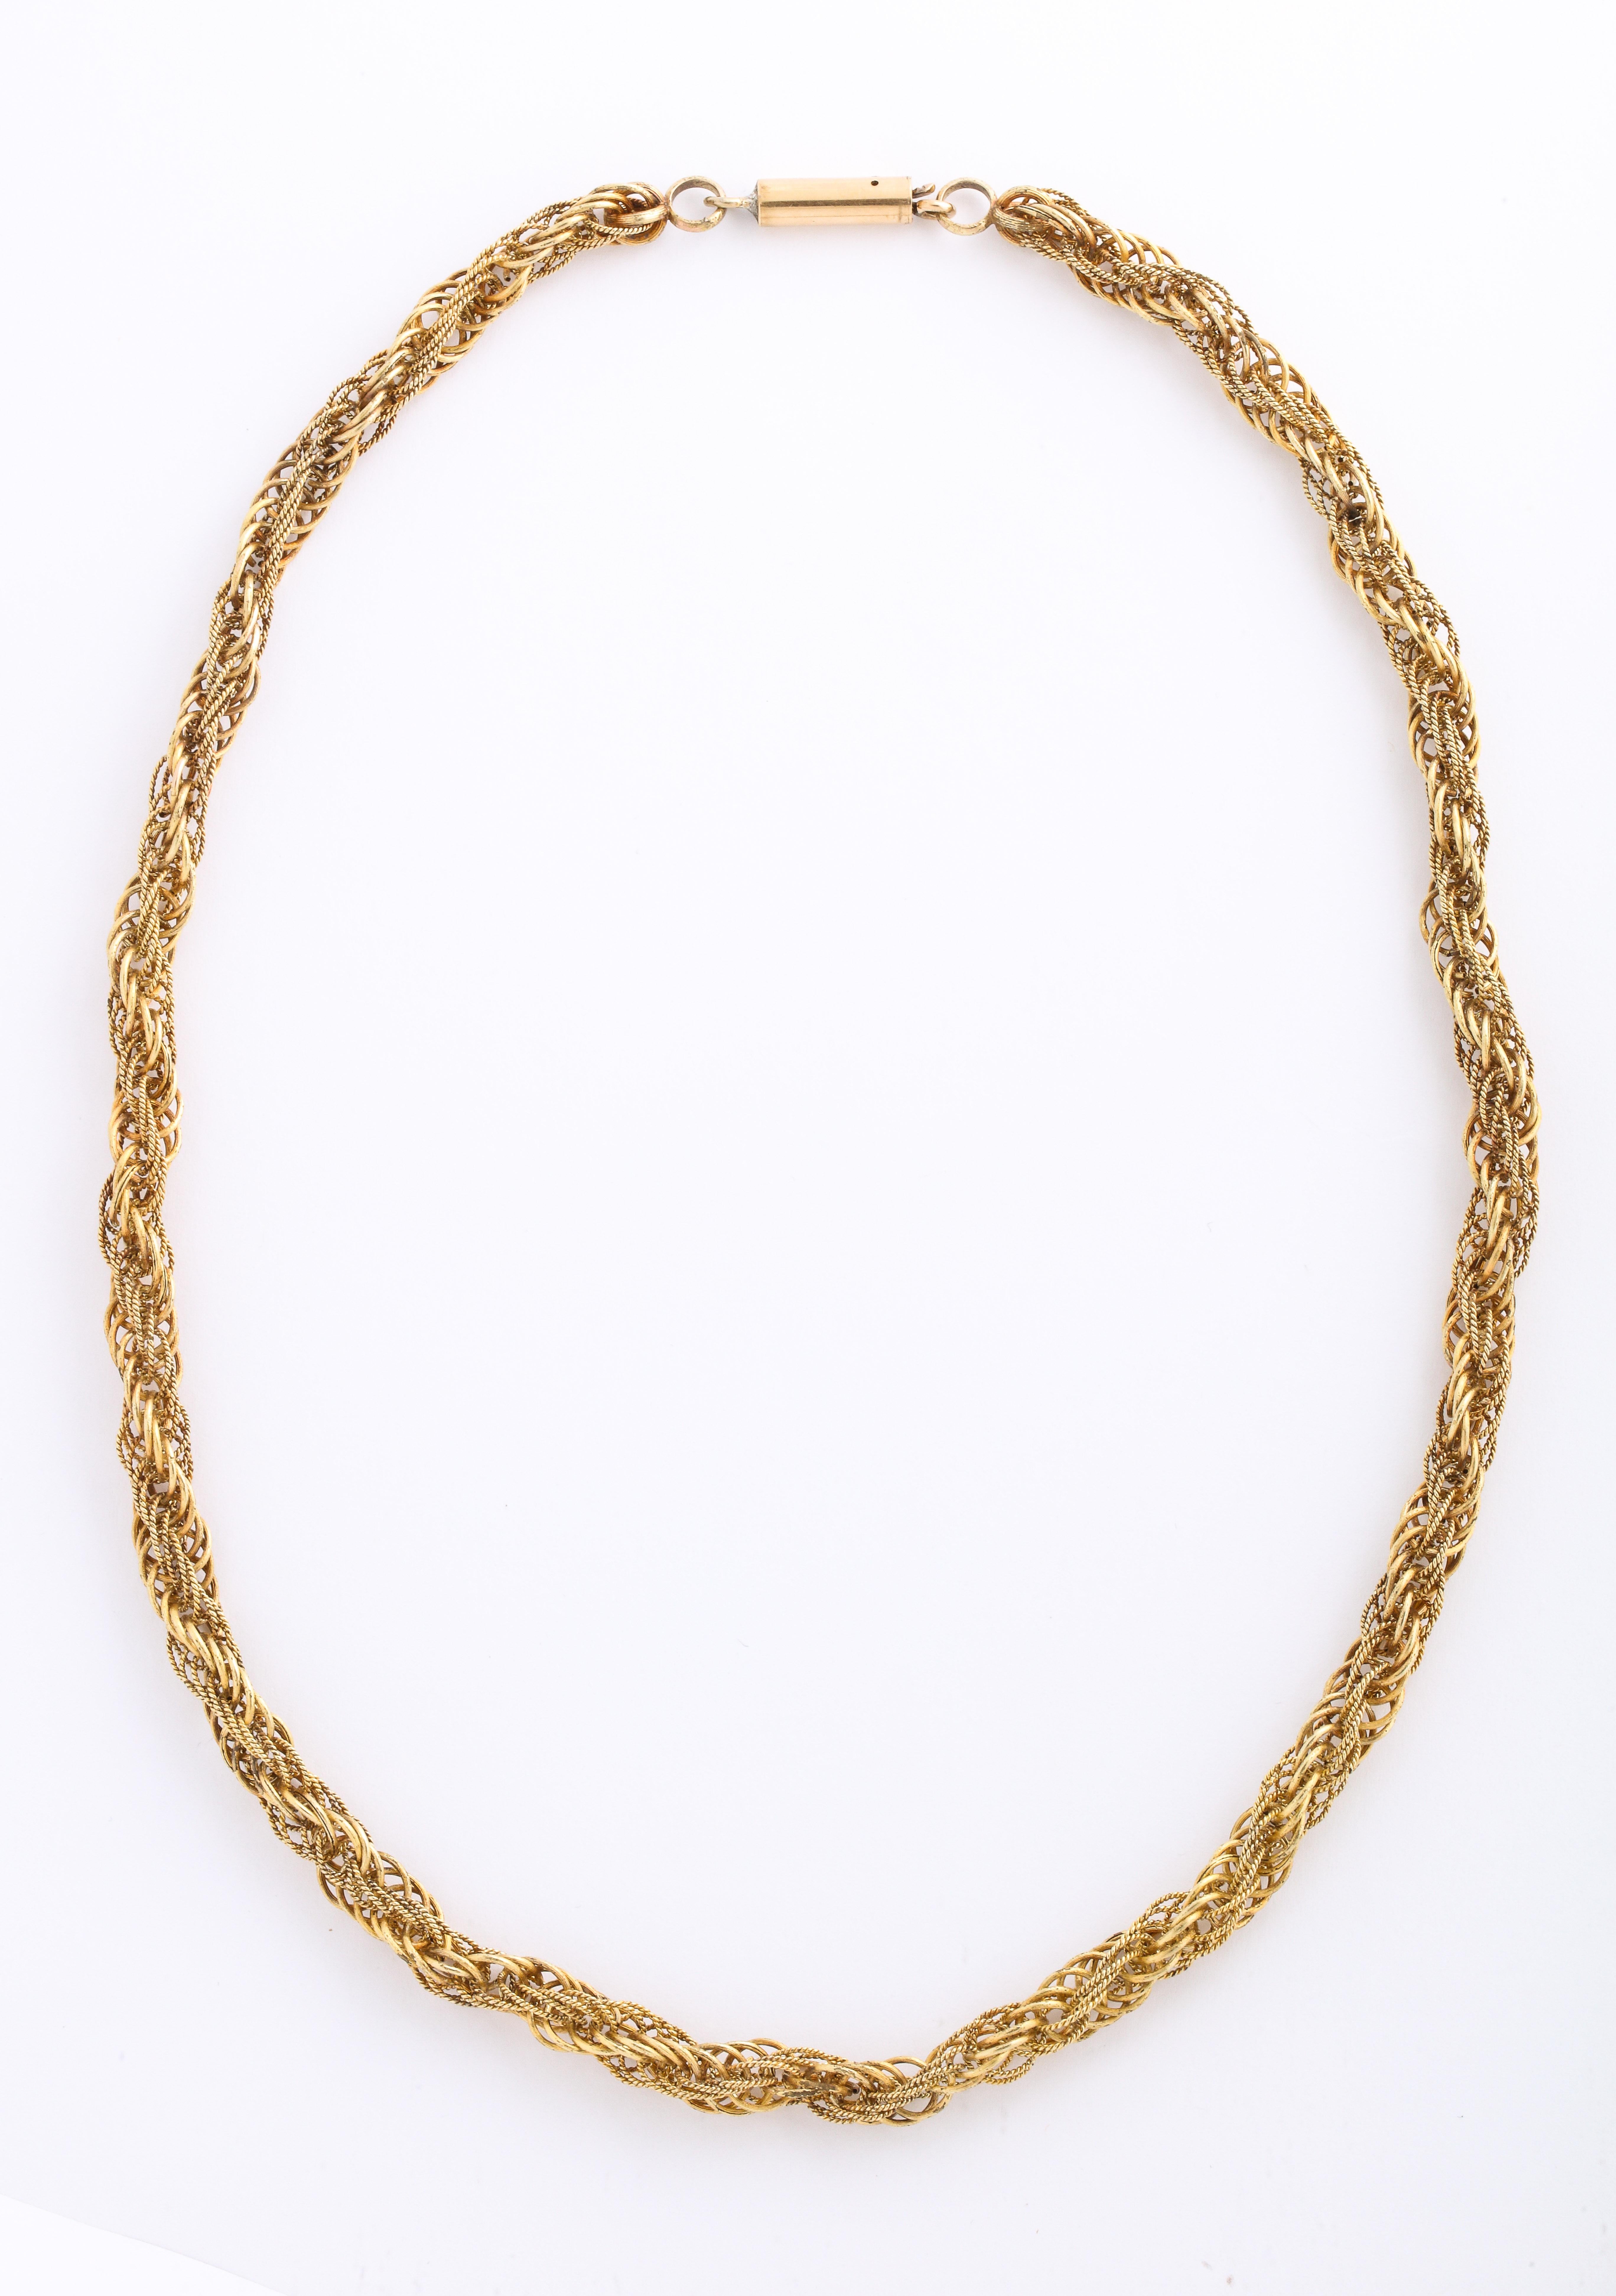 A twisted and braided 15 Kt rope chain from the Georgian period in a super wearable length and at good value. With the price of gold so high, one would expect the price to be $4000.. Bargains are dinosaurs. 
The chain can be worn inside a shirt